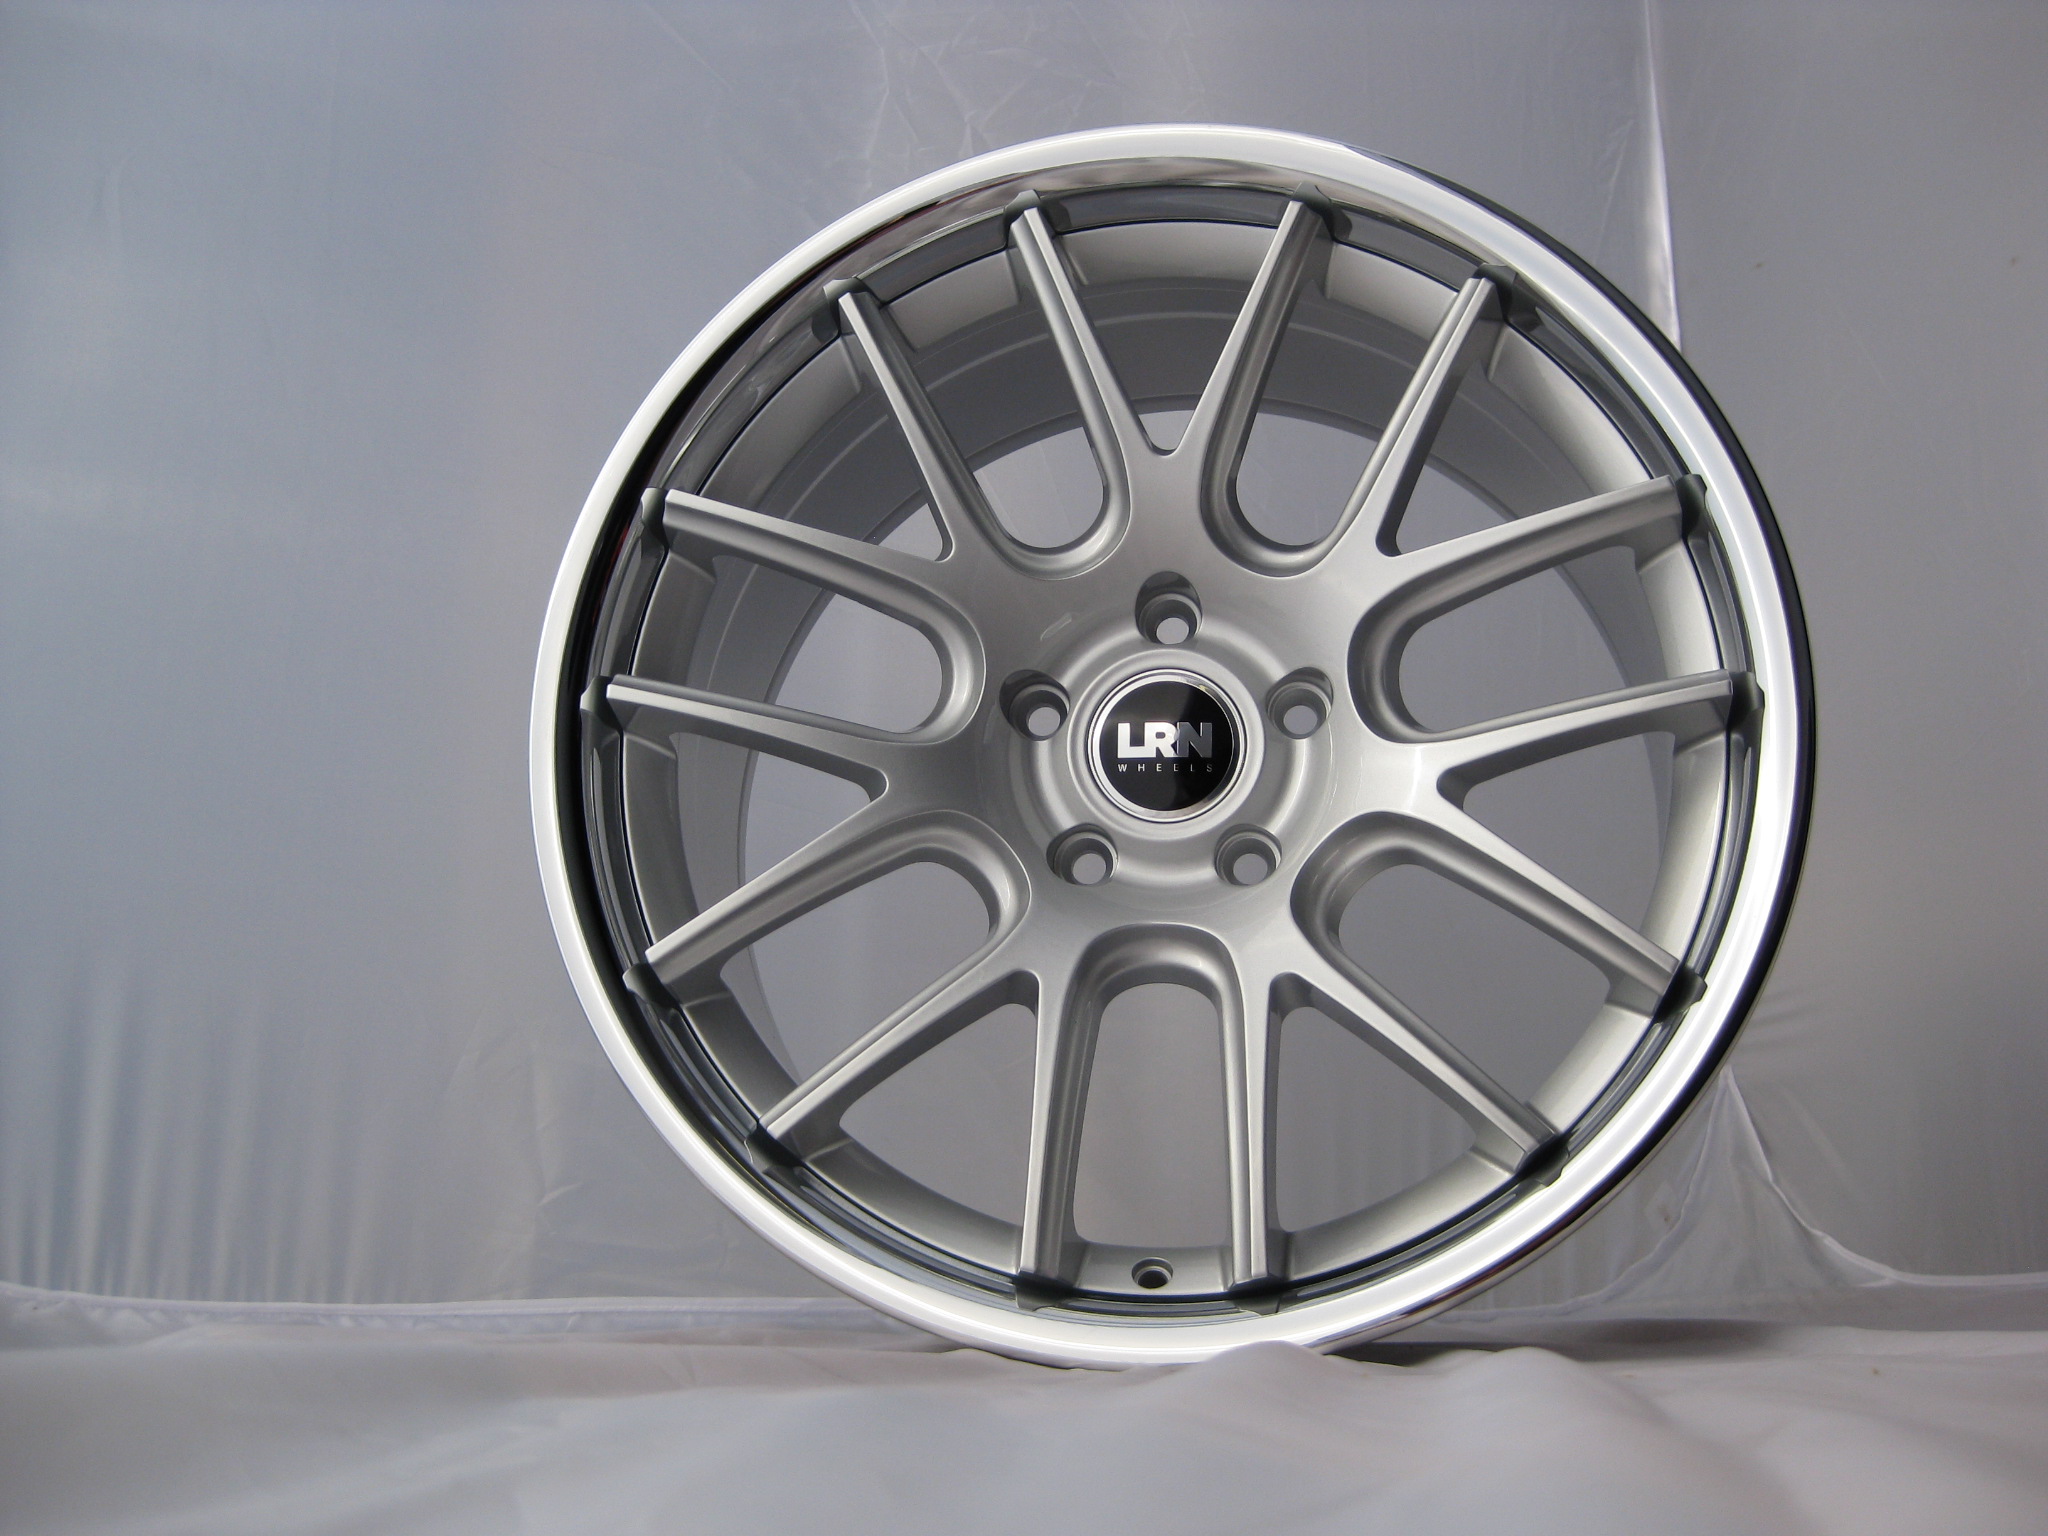 NEW 19" LRN VECTOR ALLOY WHEELS IN SILVER WITH INOX DISH